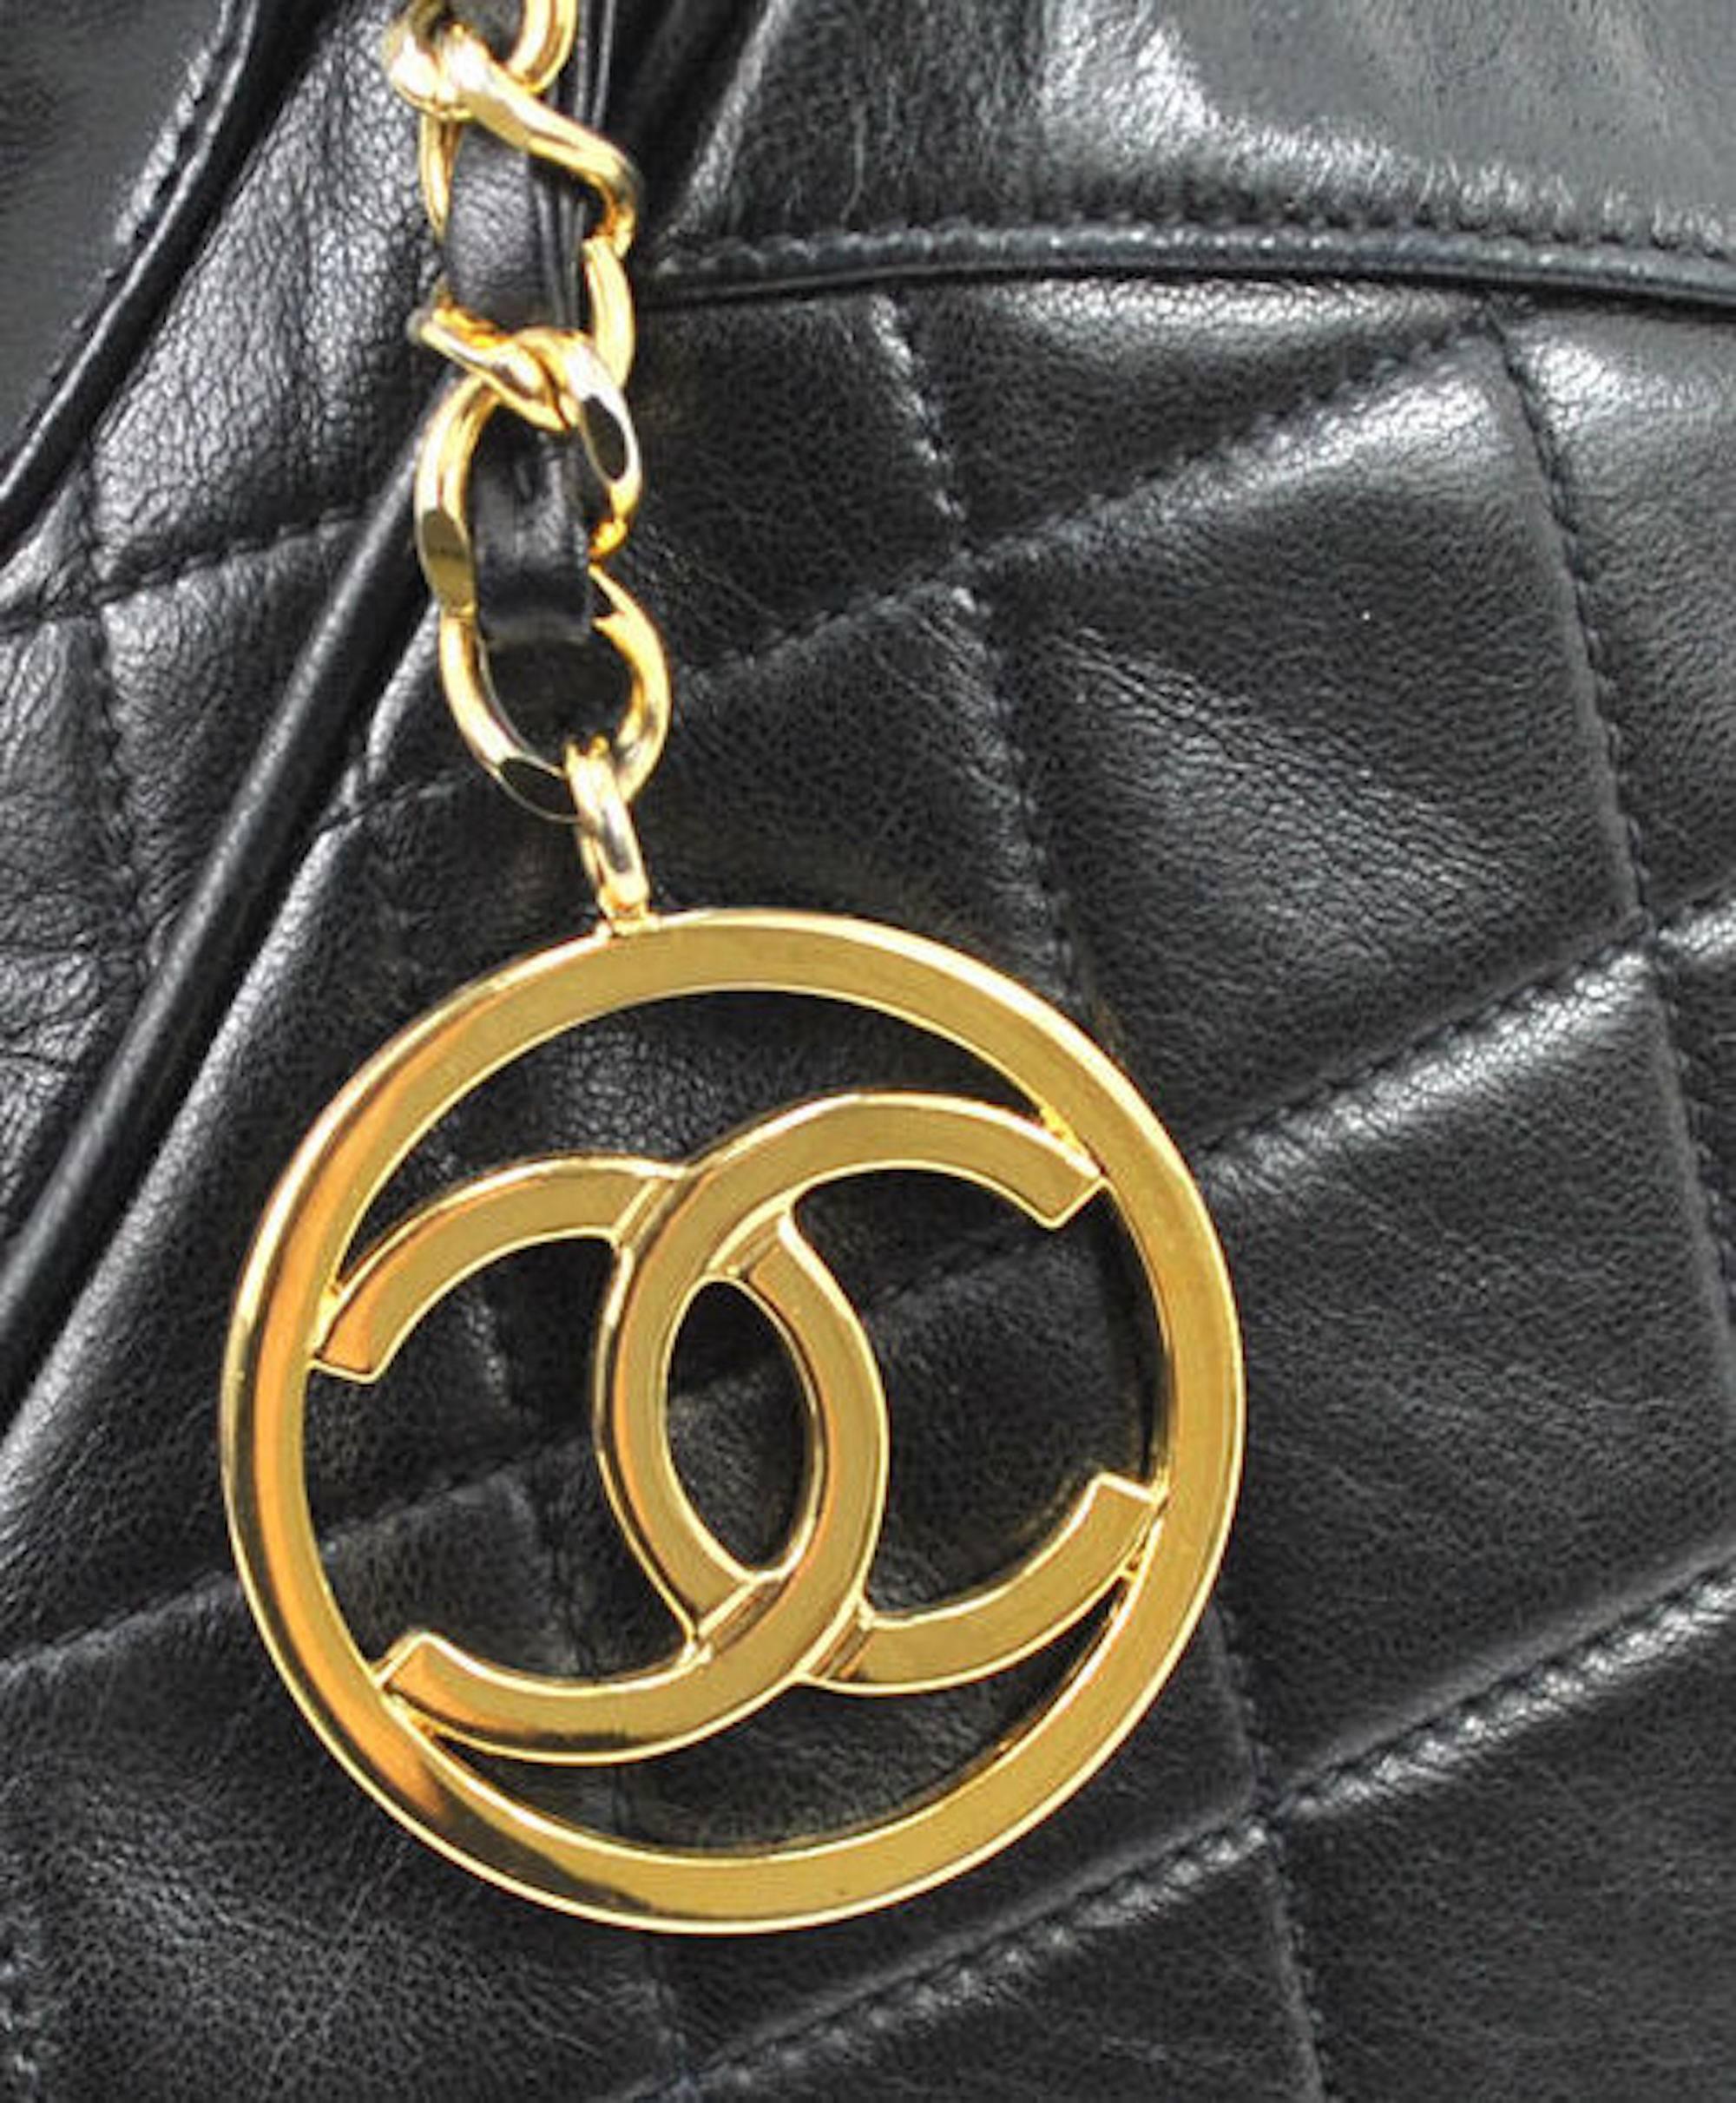 CURATOR'S NOTES

Chanel Black Lambskin Coin Charm Hobo Style Short Shoulder Top Handle Bag 

Lambskin leather
Gold tone hardware
Zipper closure
Made in Italy
Shoulder strap drop 7.5"
Charm measures 2" W x 2" H 
Measures 10.5" W x